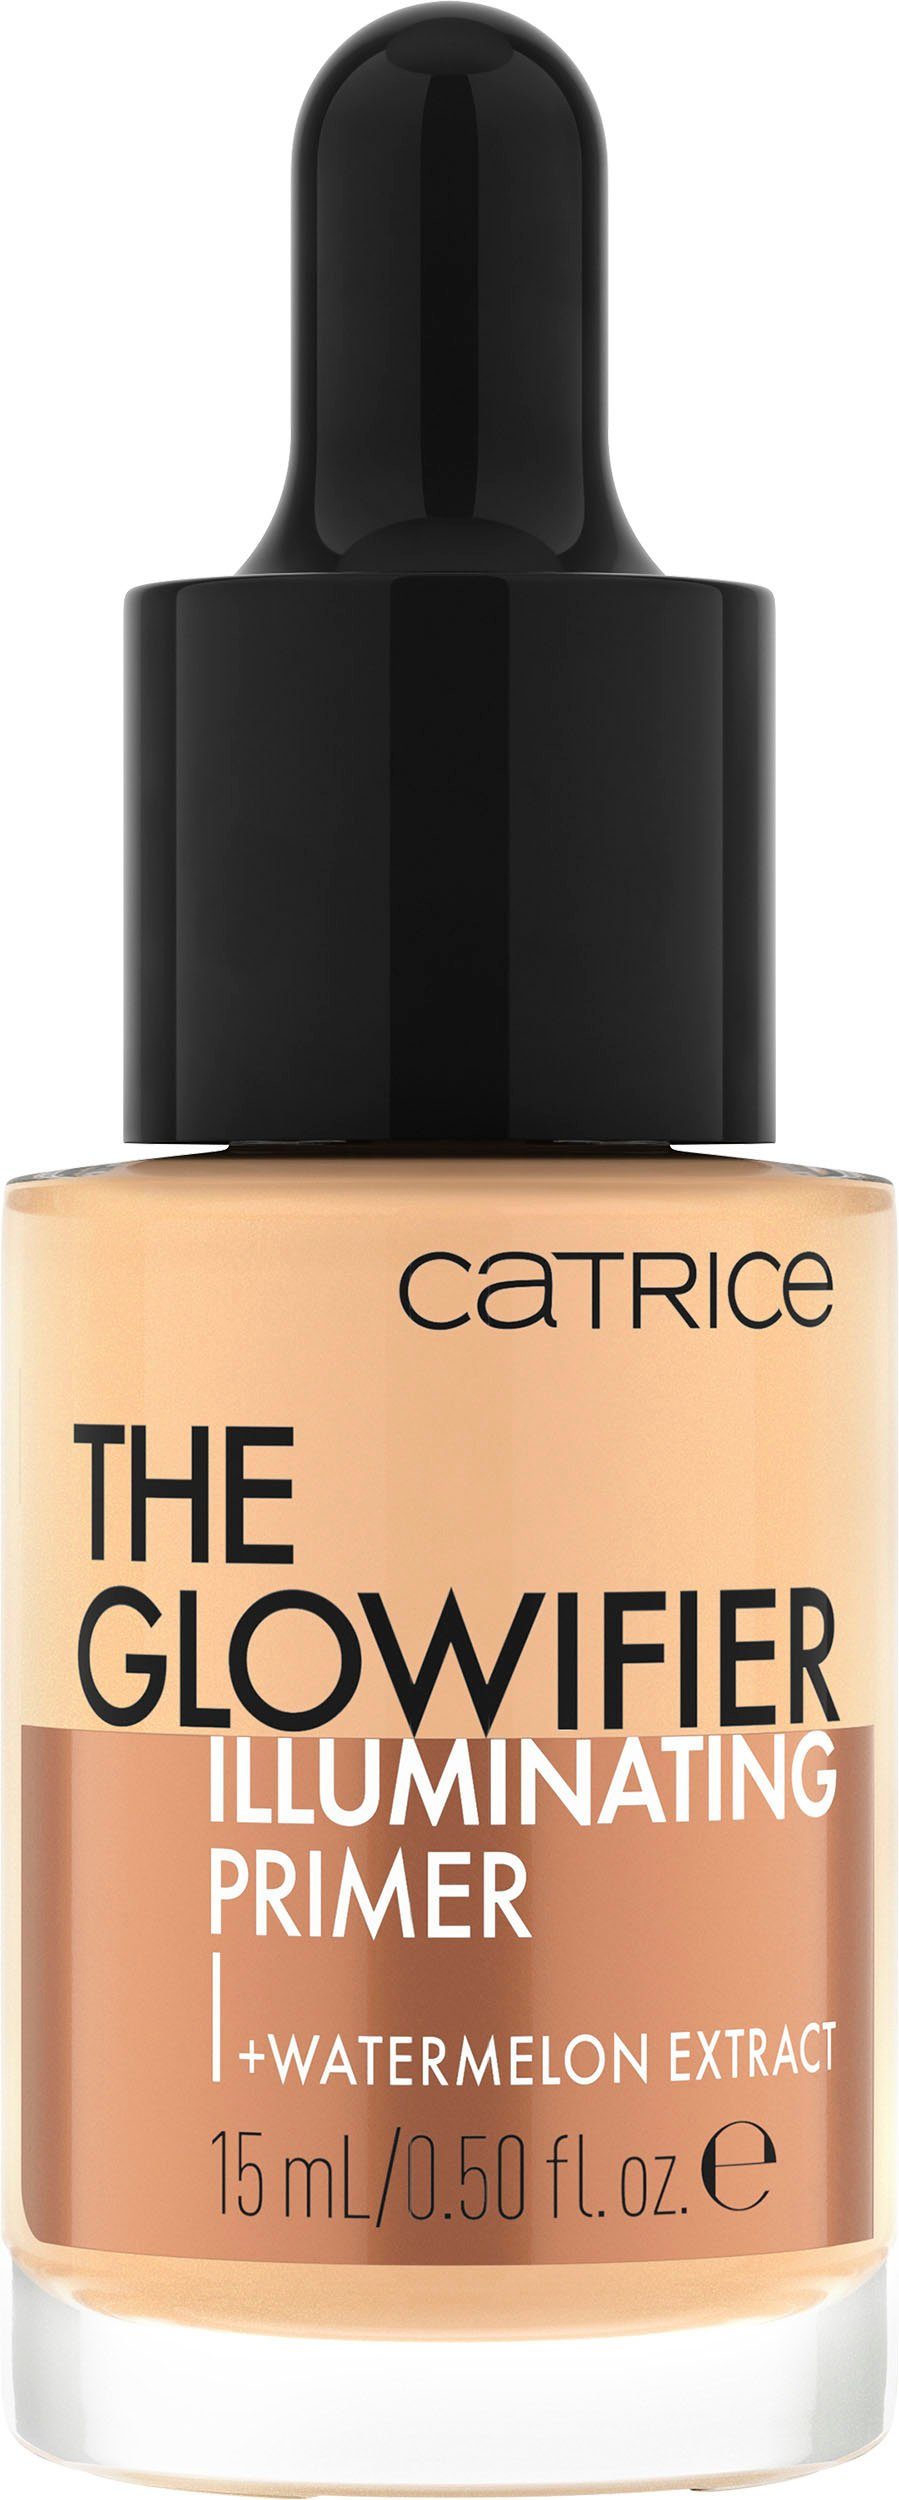 Catrice Primer Catrice The Glowifier Illuminating Primer 010,